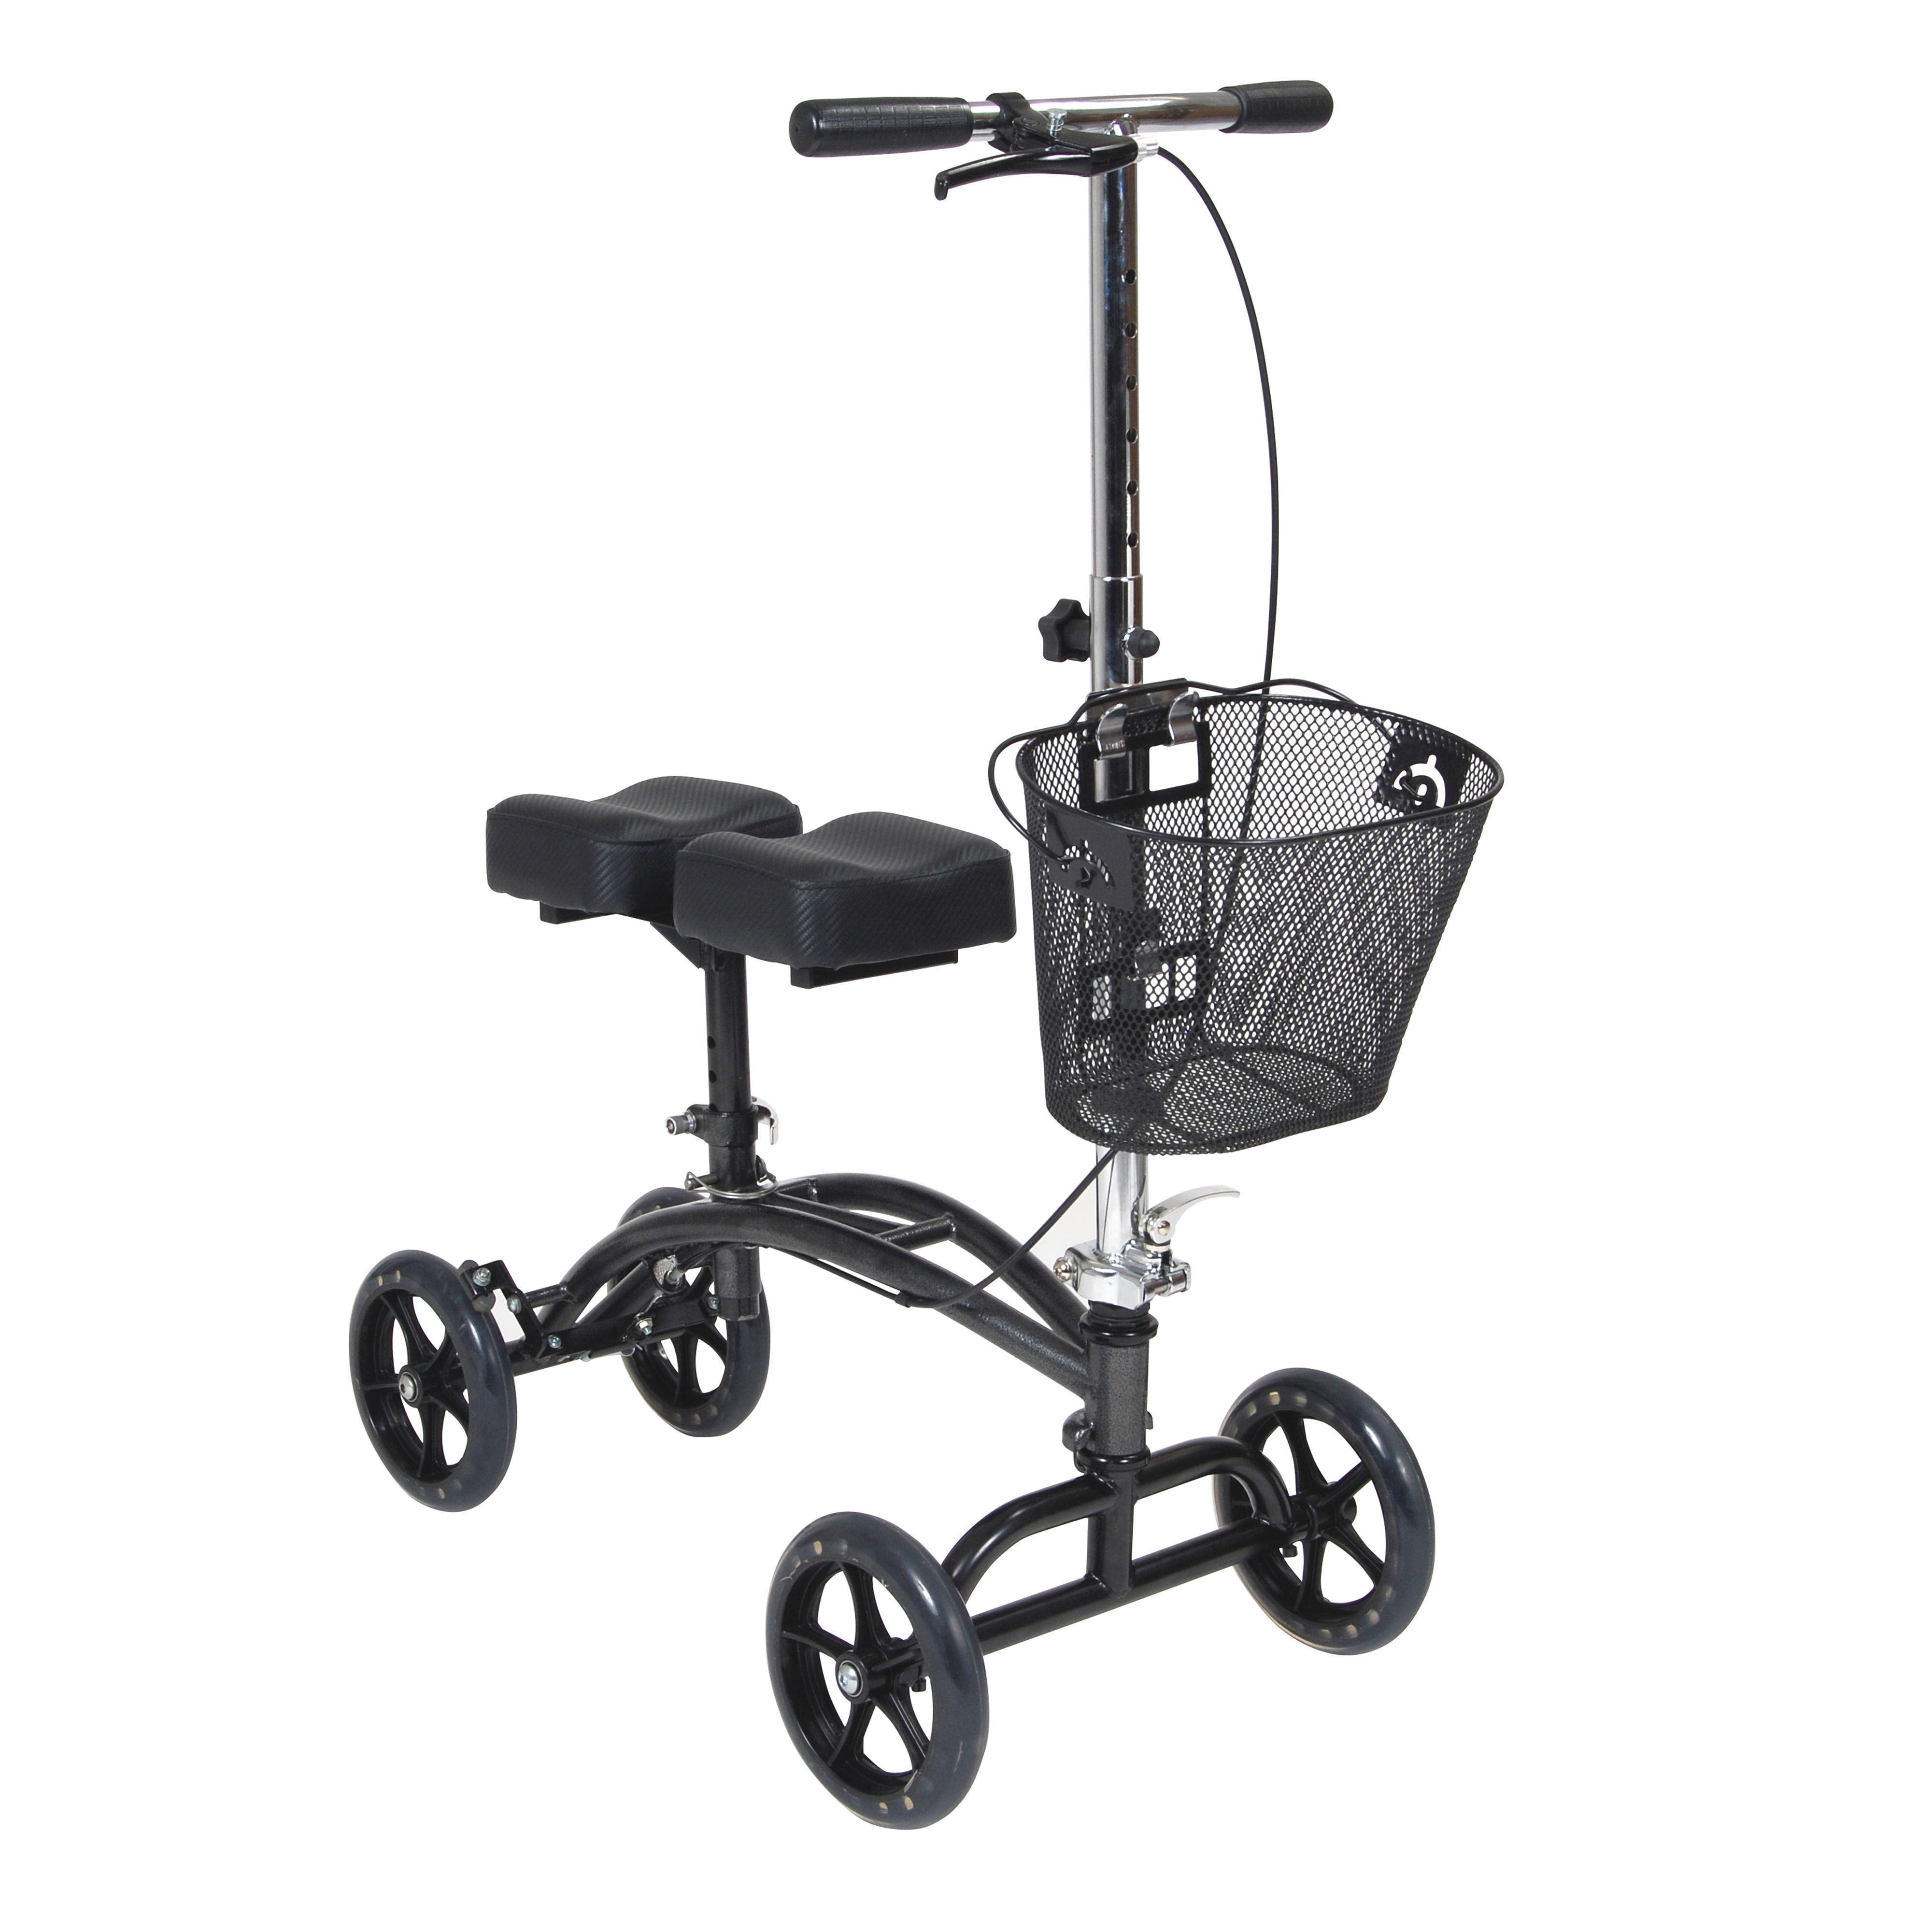 Drive Medical Dual Pad Steerable Knee Walker Knee Scooter with Basket, Alternative to Crutches - image 1 of 6